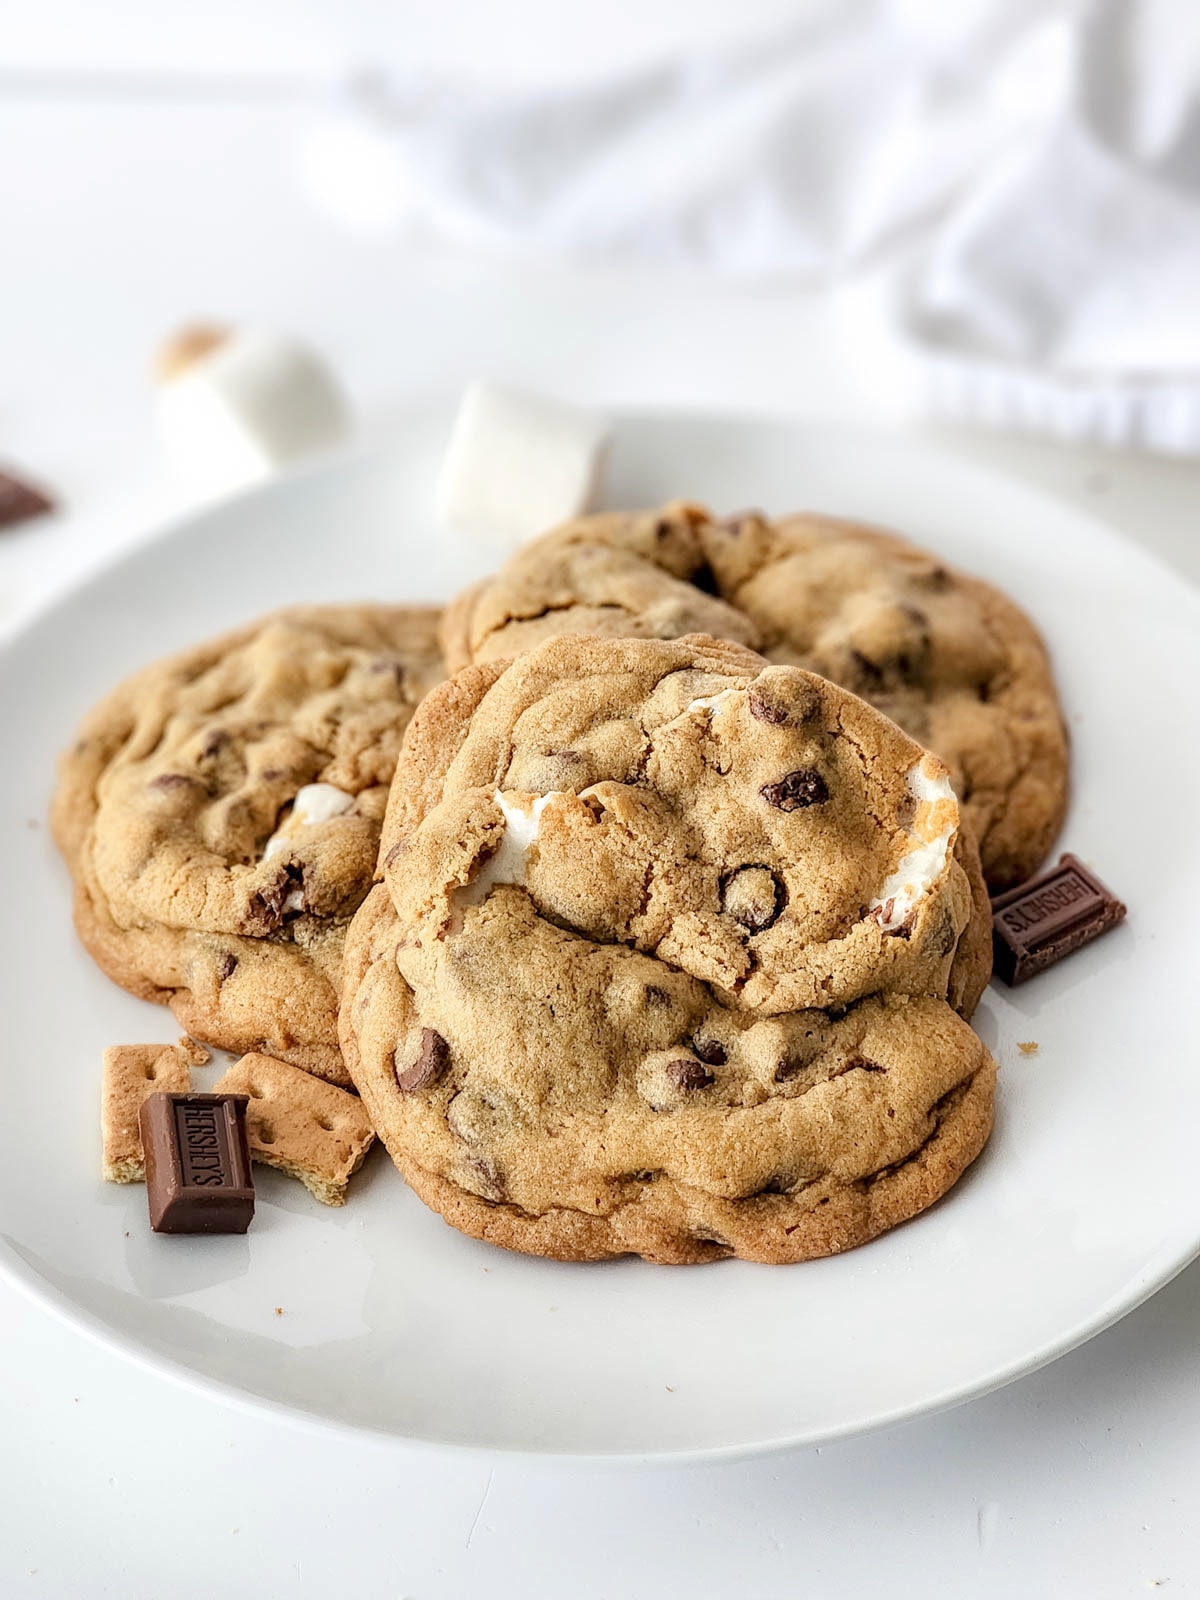 S'mores cookies on white plate with white napkin